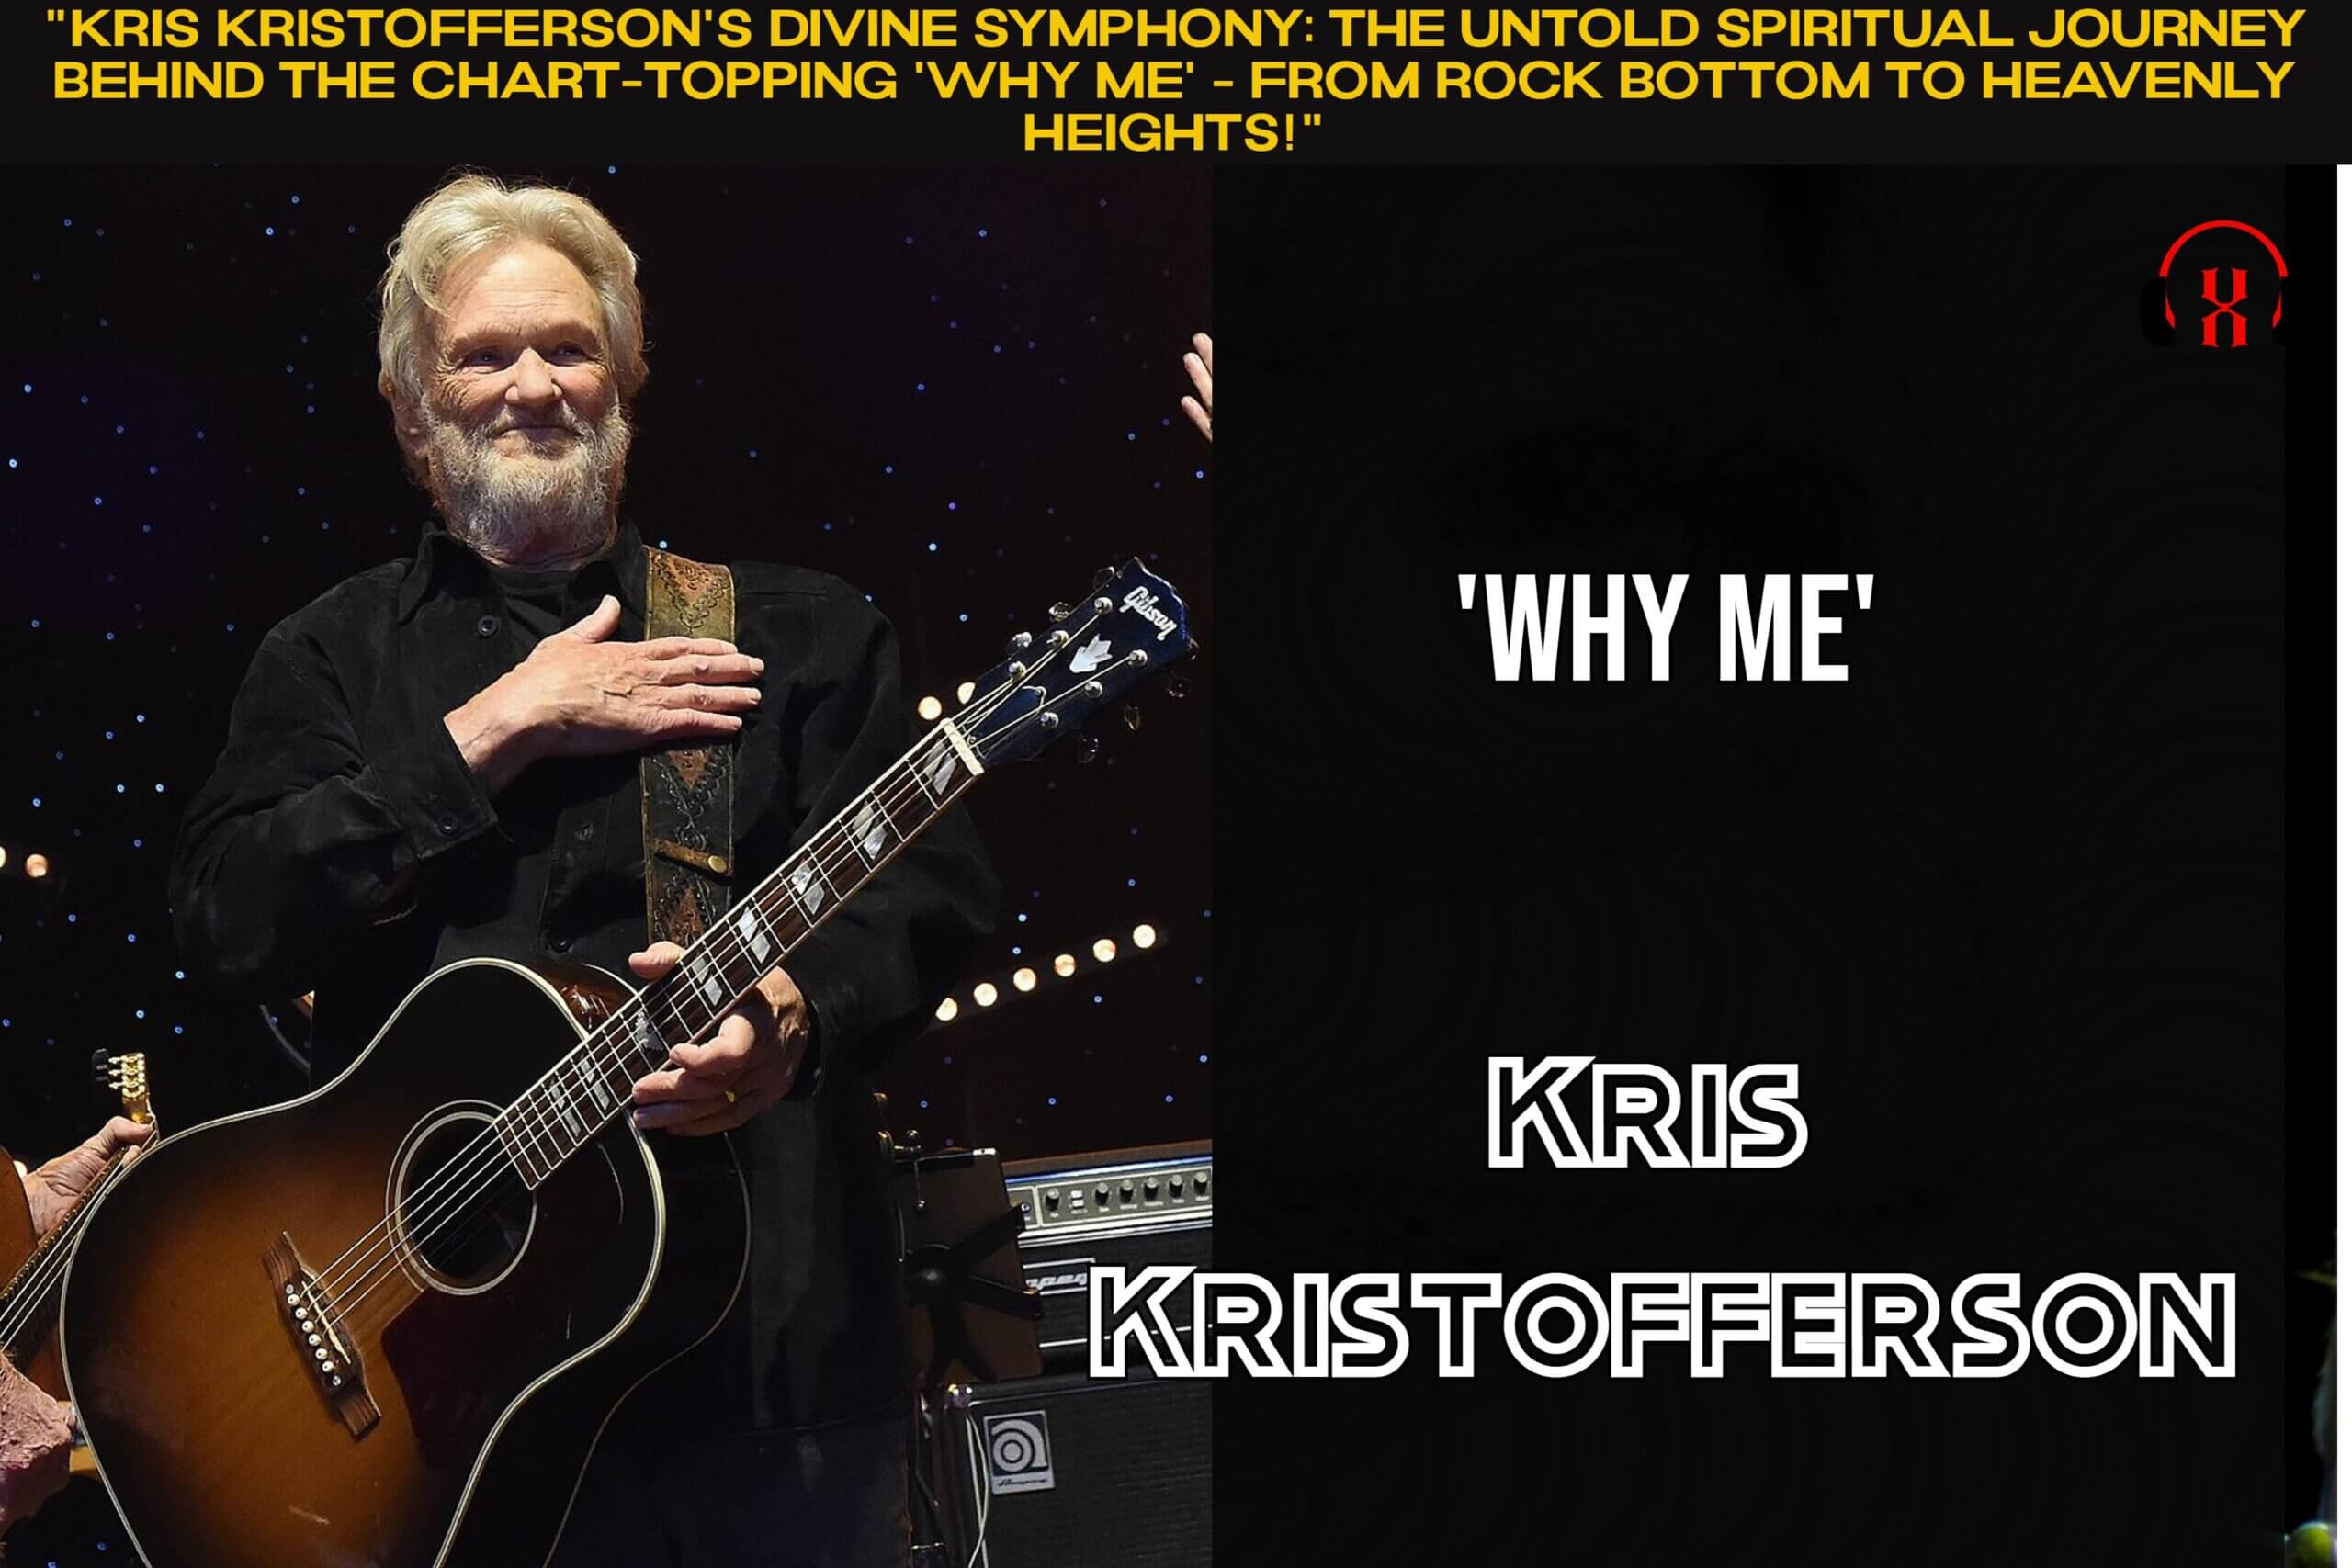 “Kris Kristofferson’s Divine Symphony: The Untold Spiritual Journey Behind the Chart-Topping ‘Why Me’ – From Rock Bottom to Heavenly Heights!”